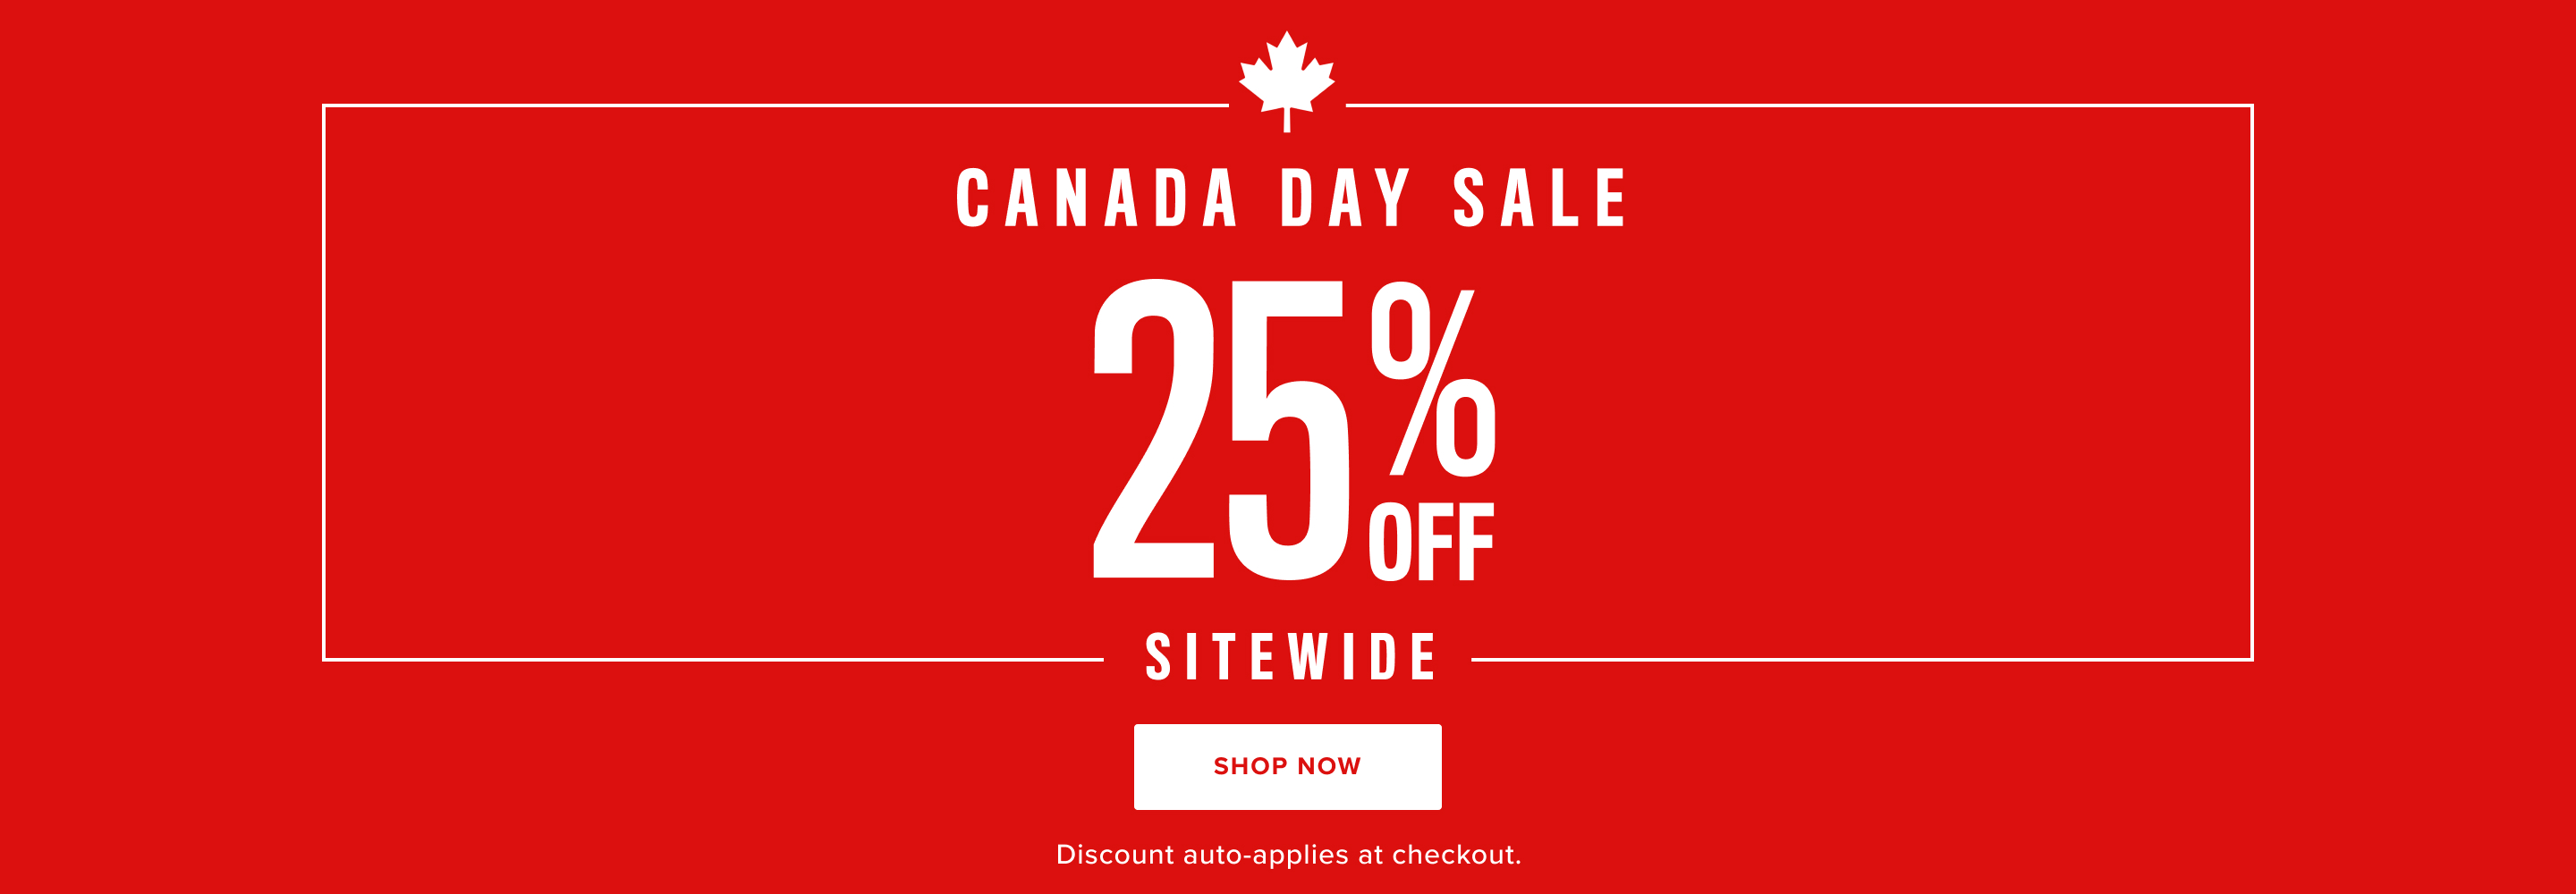 Canada Day Sale 25% Off Sitewide. Discount auto applies at checkout